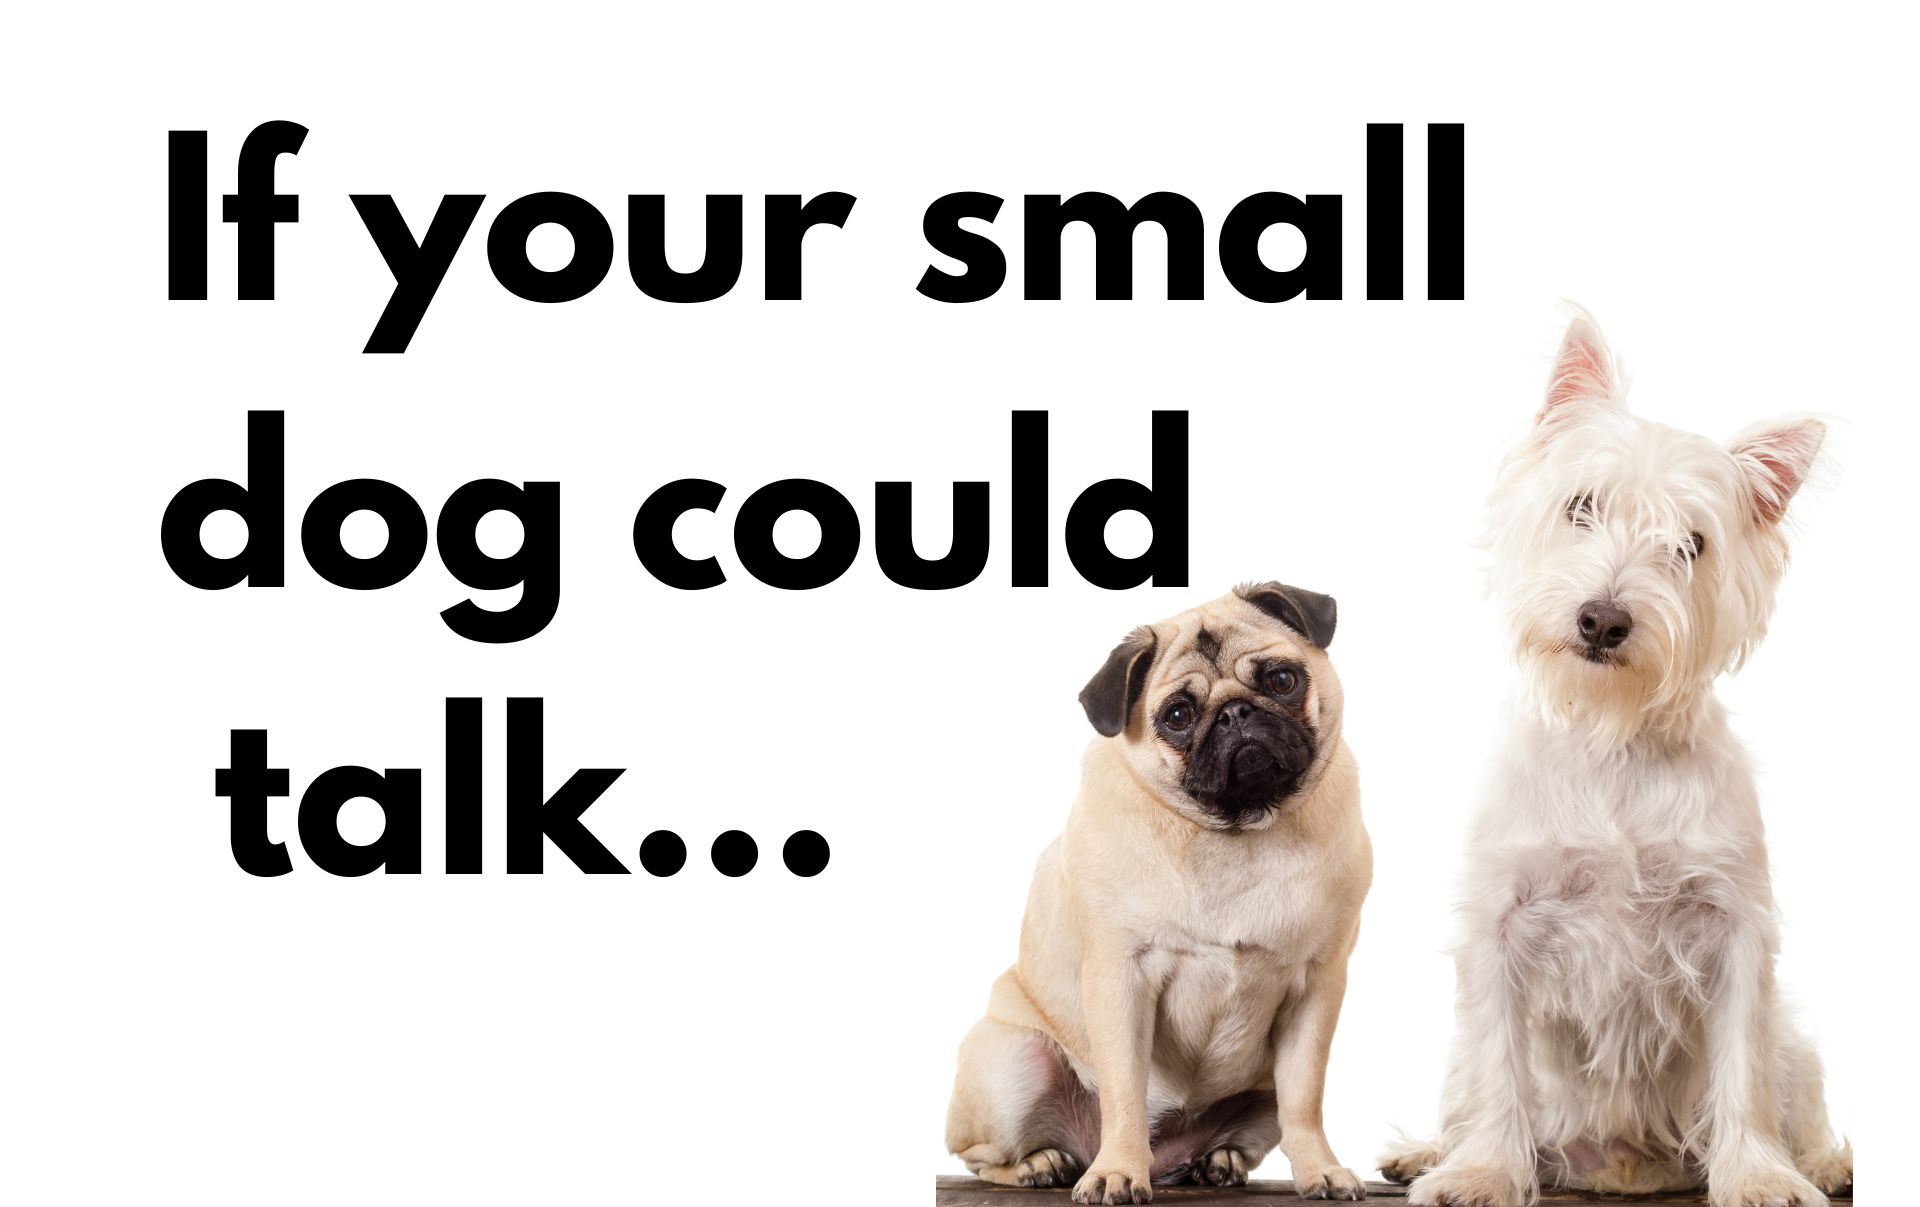 Westie and pug look like talking dogs with words "if your small dog could talk..."